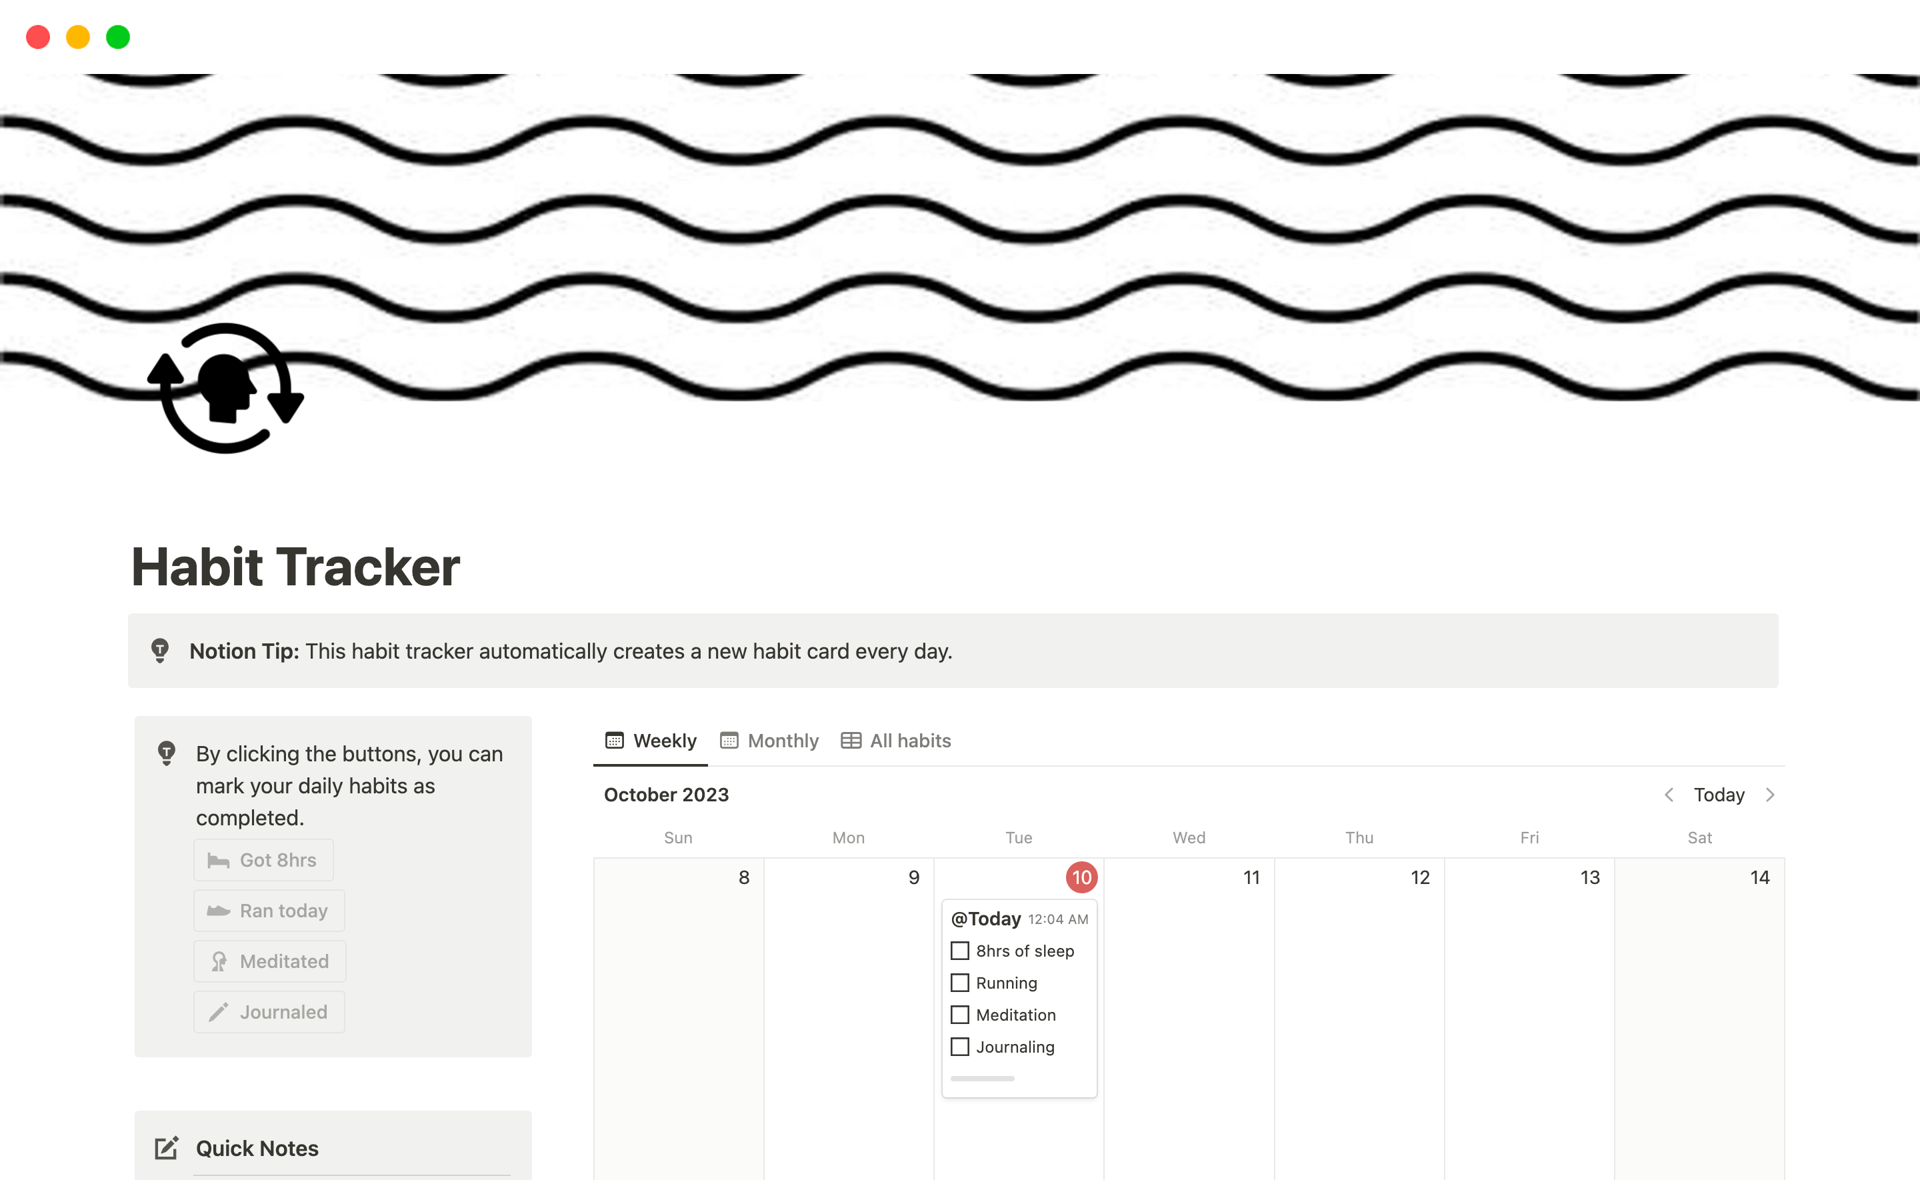 Habit tracker template: A simple way to track your habits and progress over time.